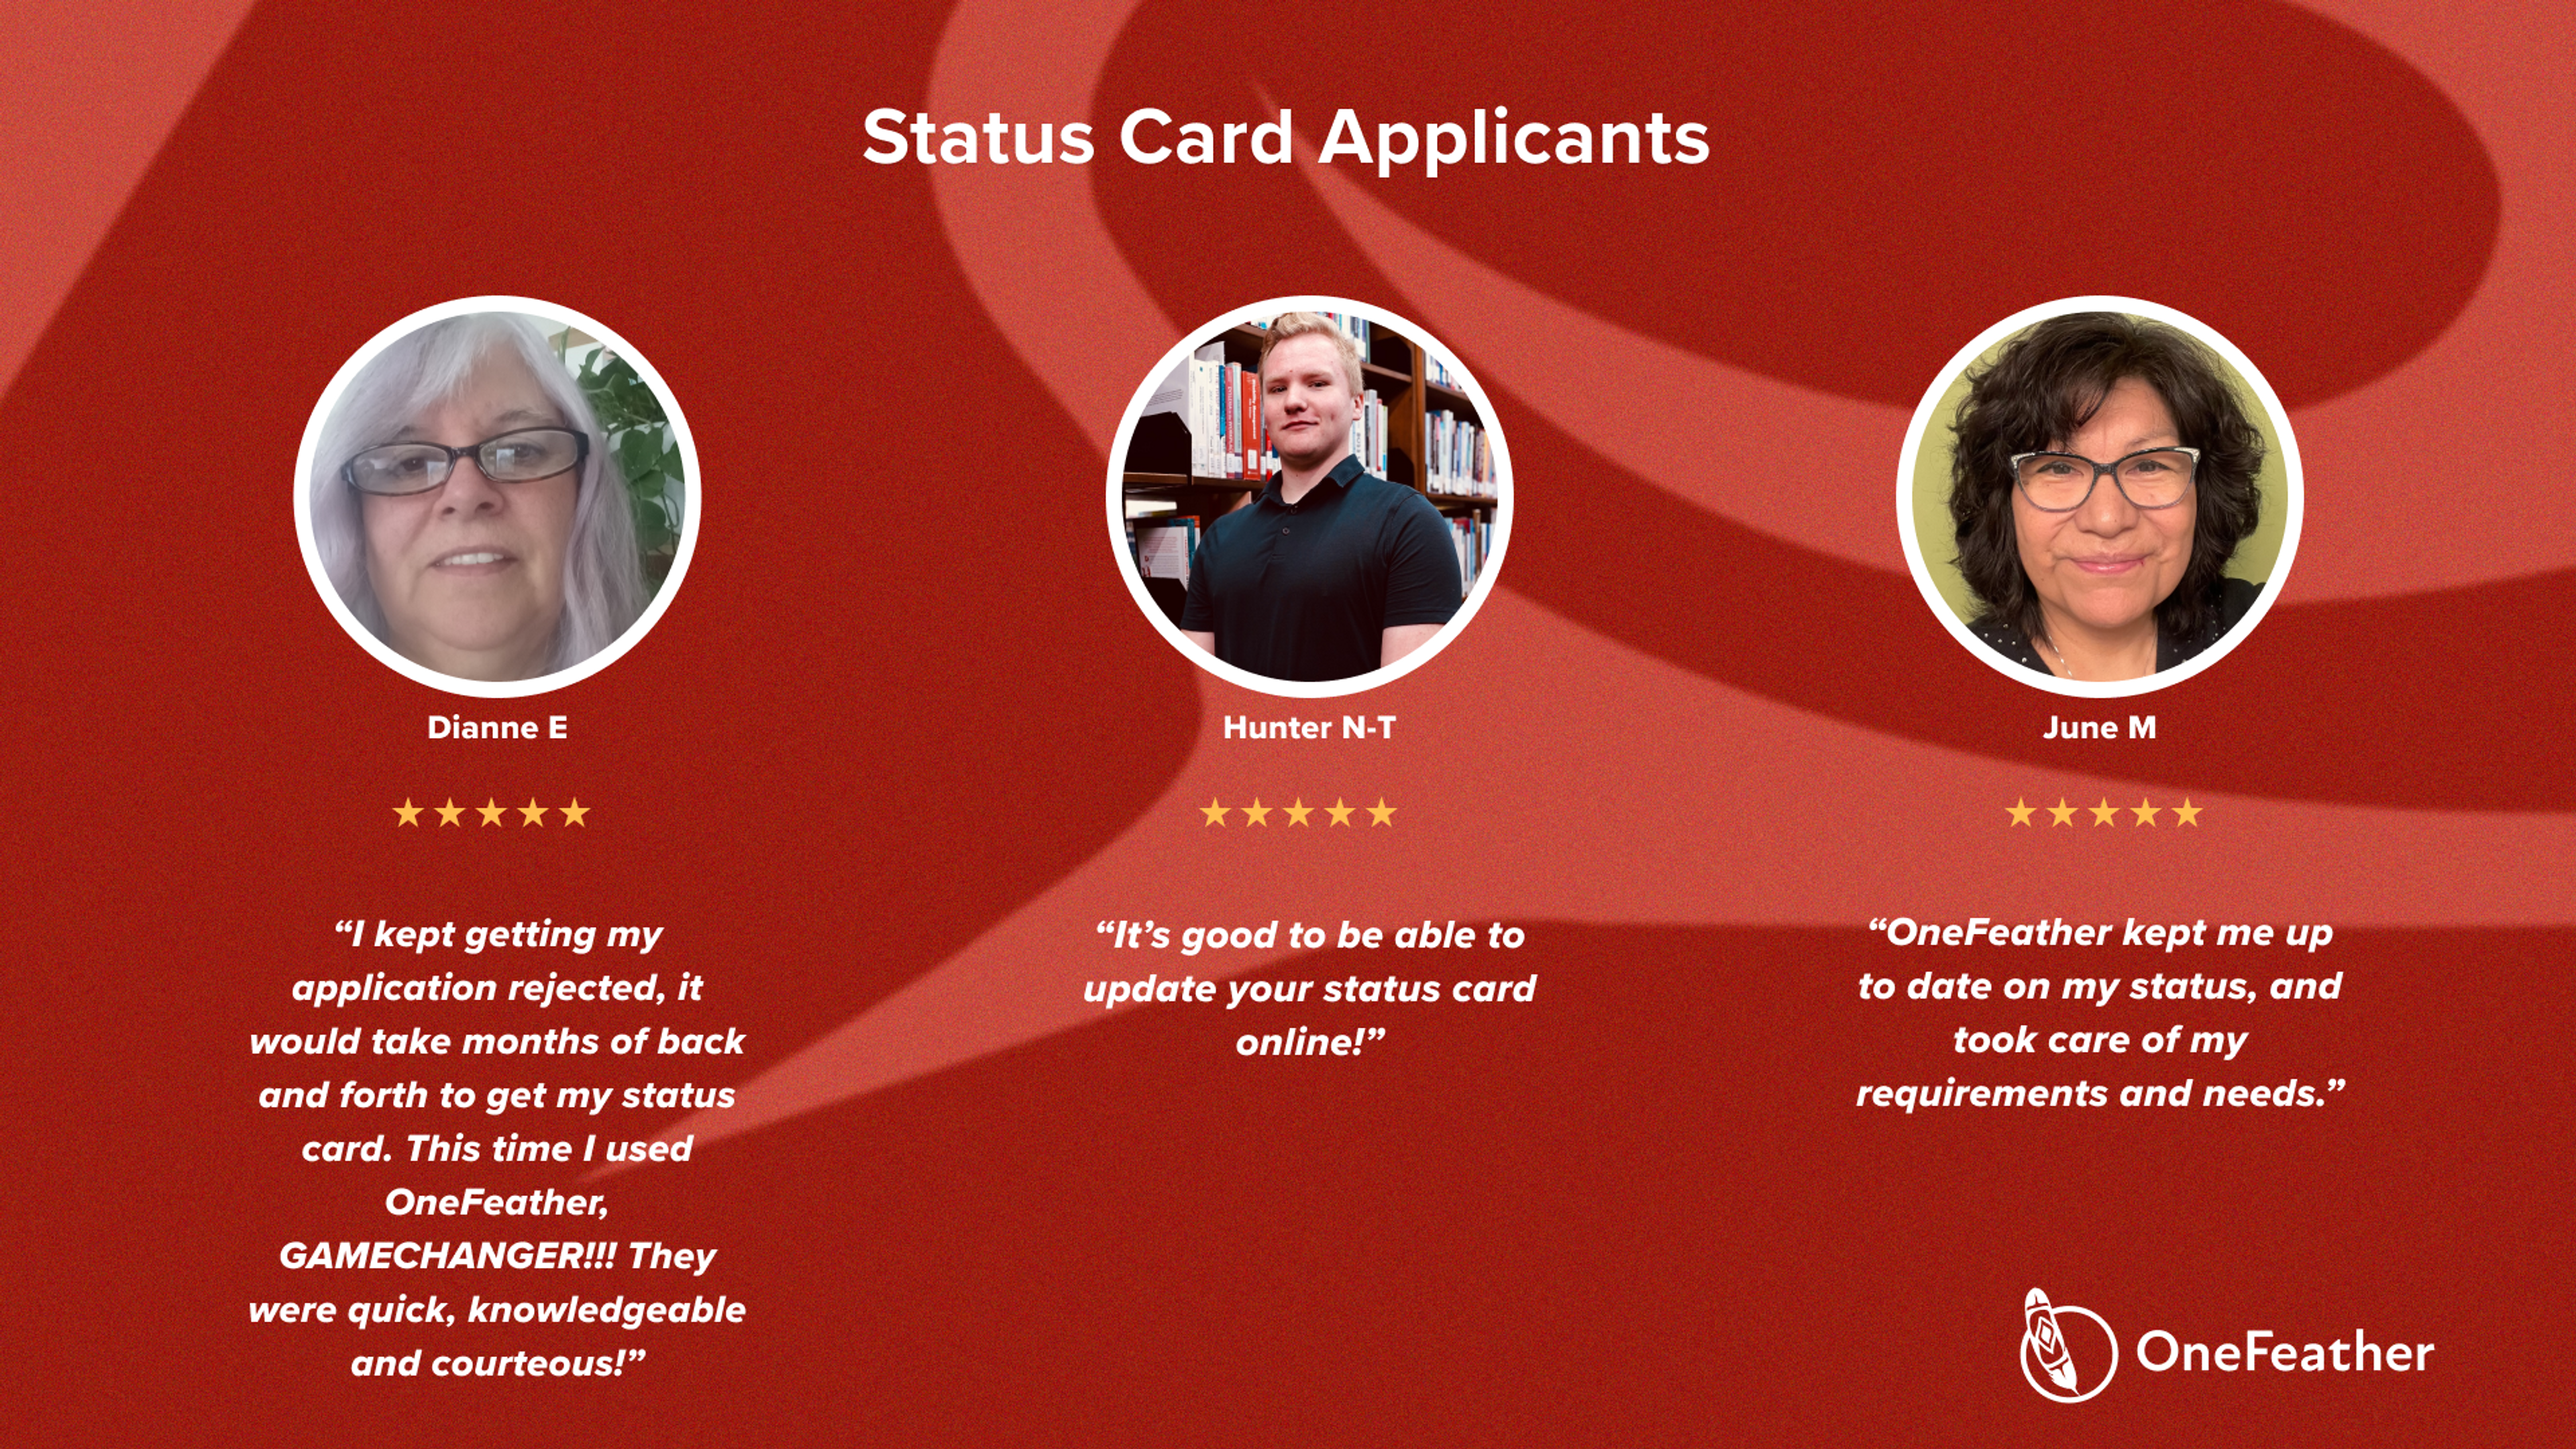 Reviews from our status card applicants